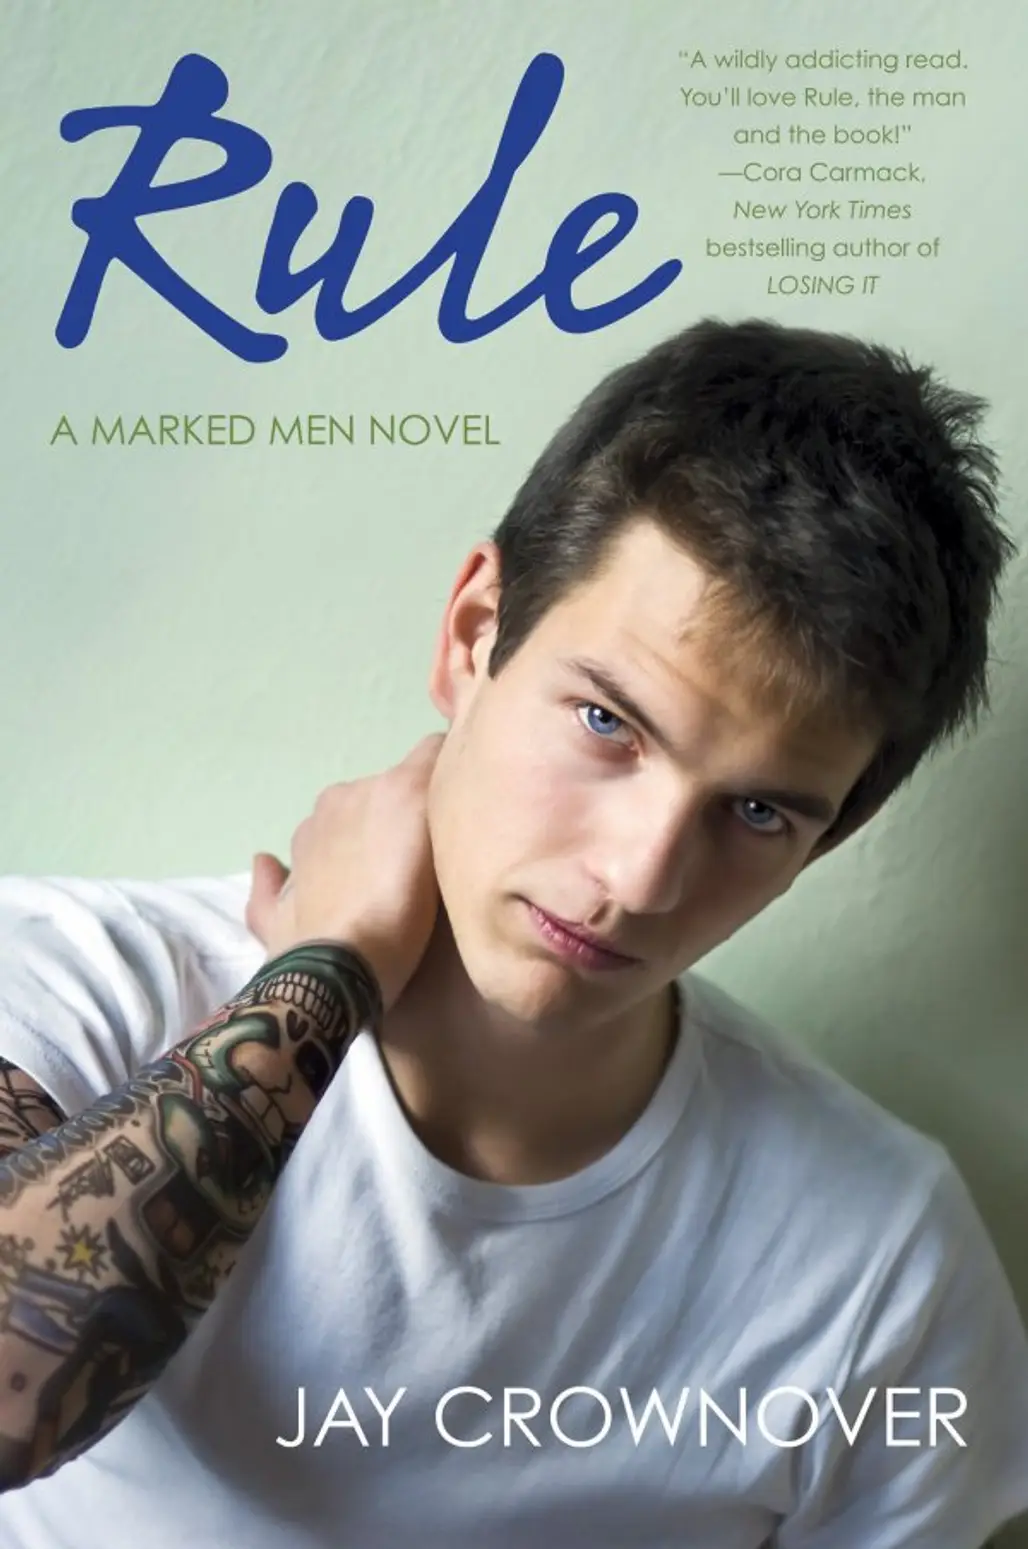 Rule: a Marked Man by Jay Crownover